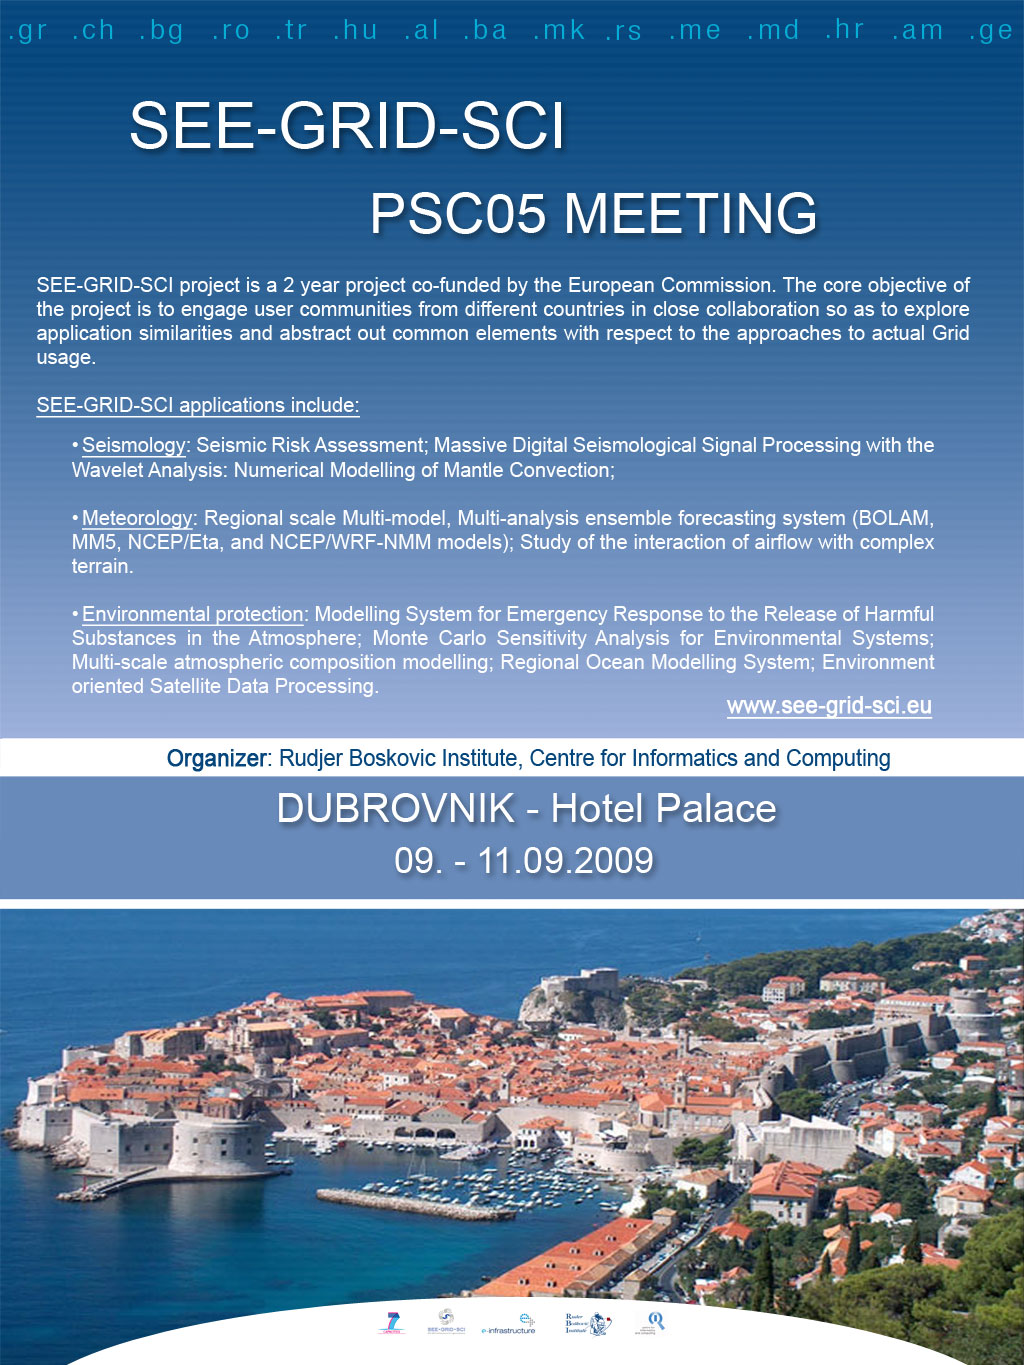 The 5th SEEGRID - SCI PSC Meeting in Dubrovnik